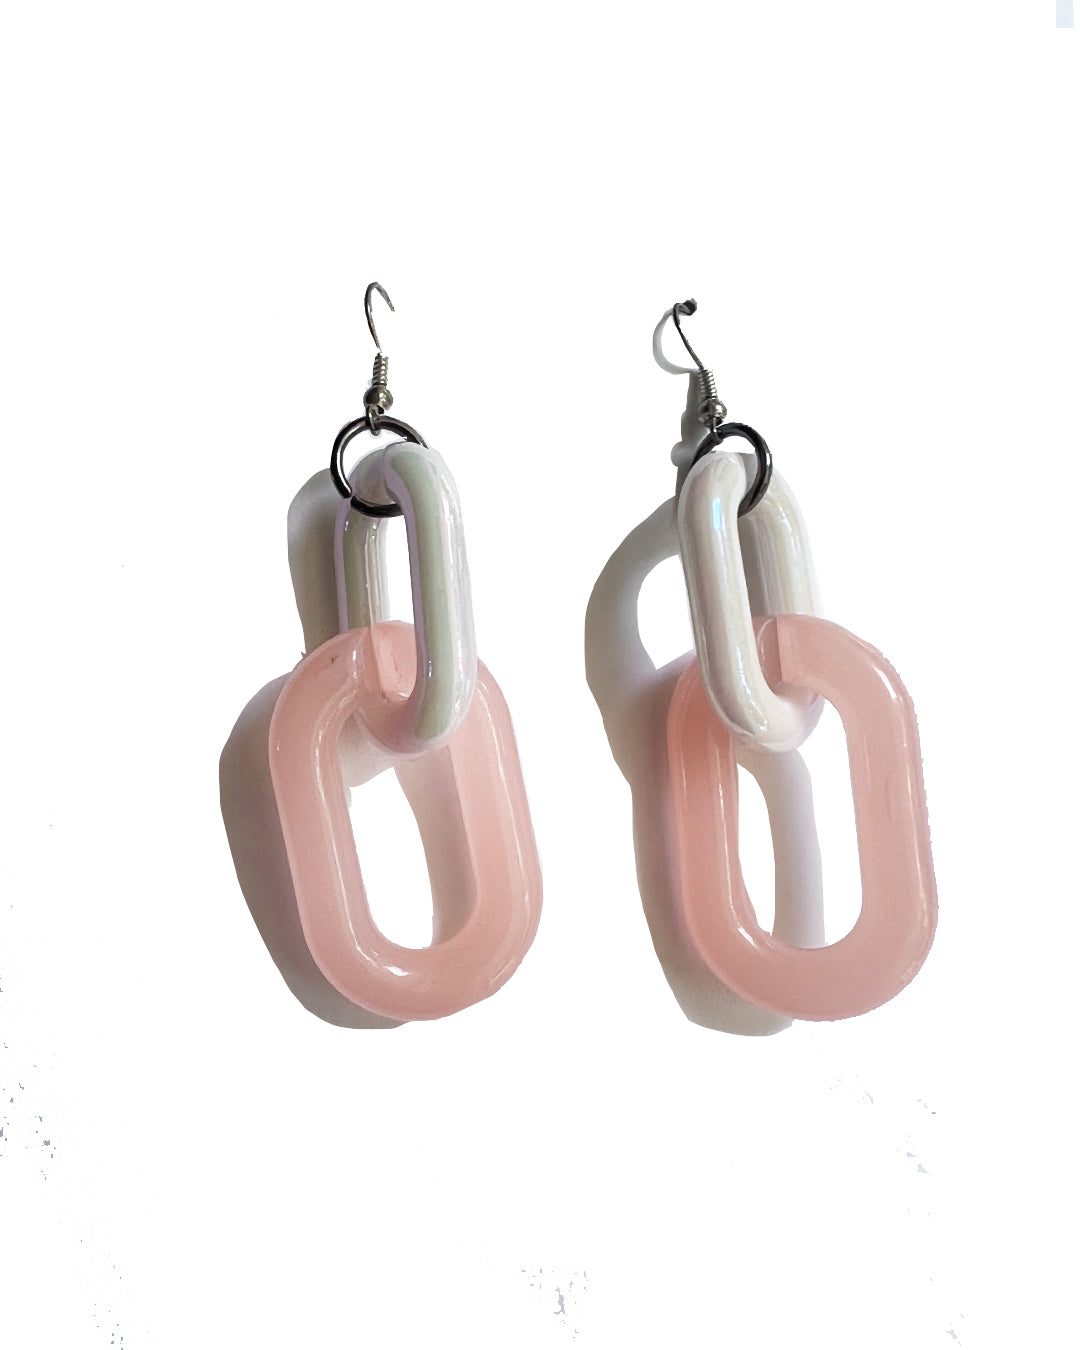 Infinite Colors Pink Iridescent White Chain Earrings | cukimber designs